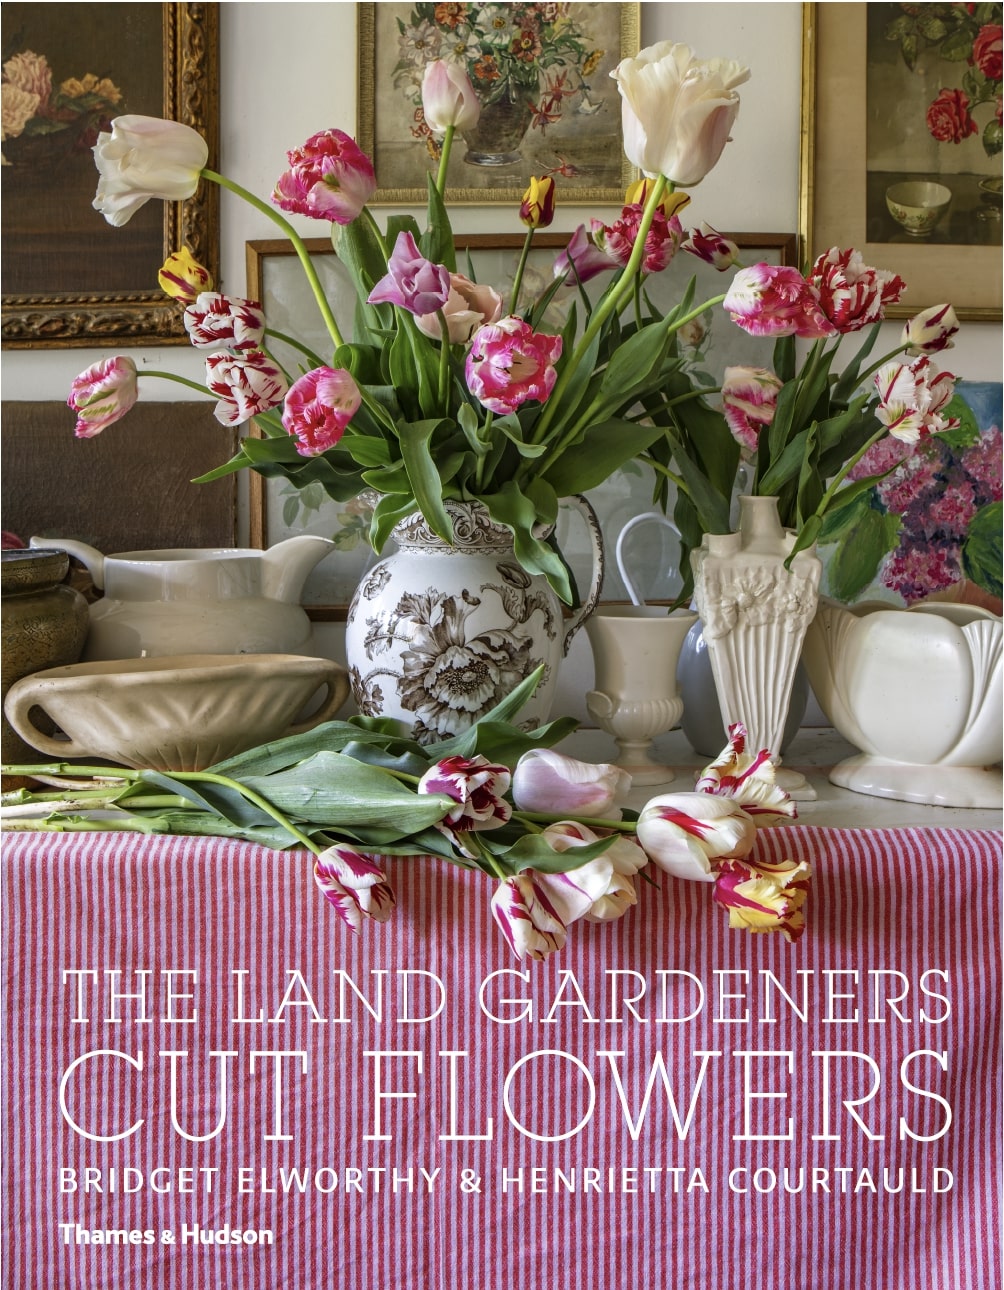 The Land Gardeners Cut Flowers book cover